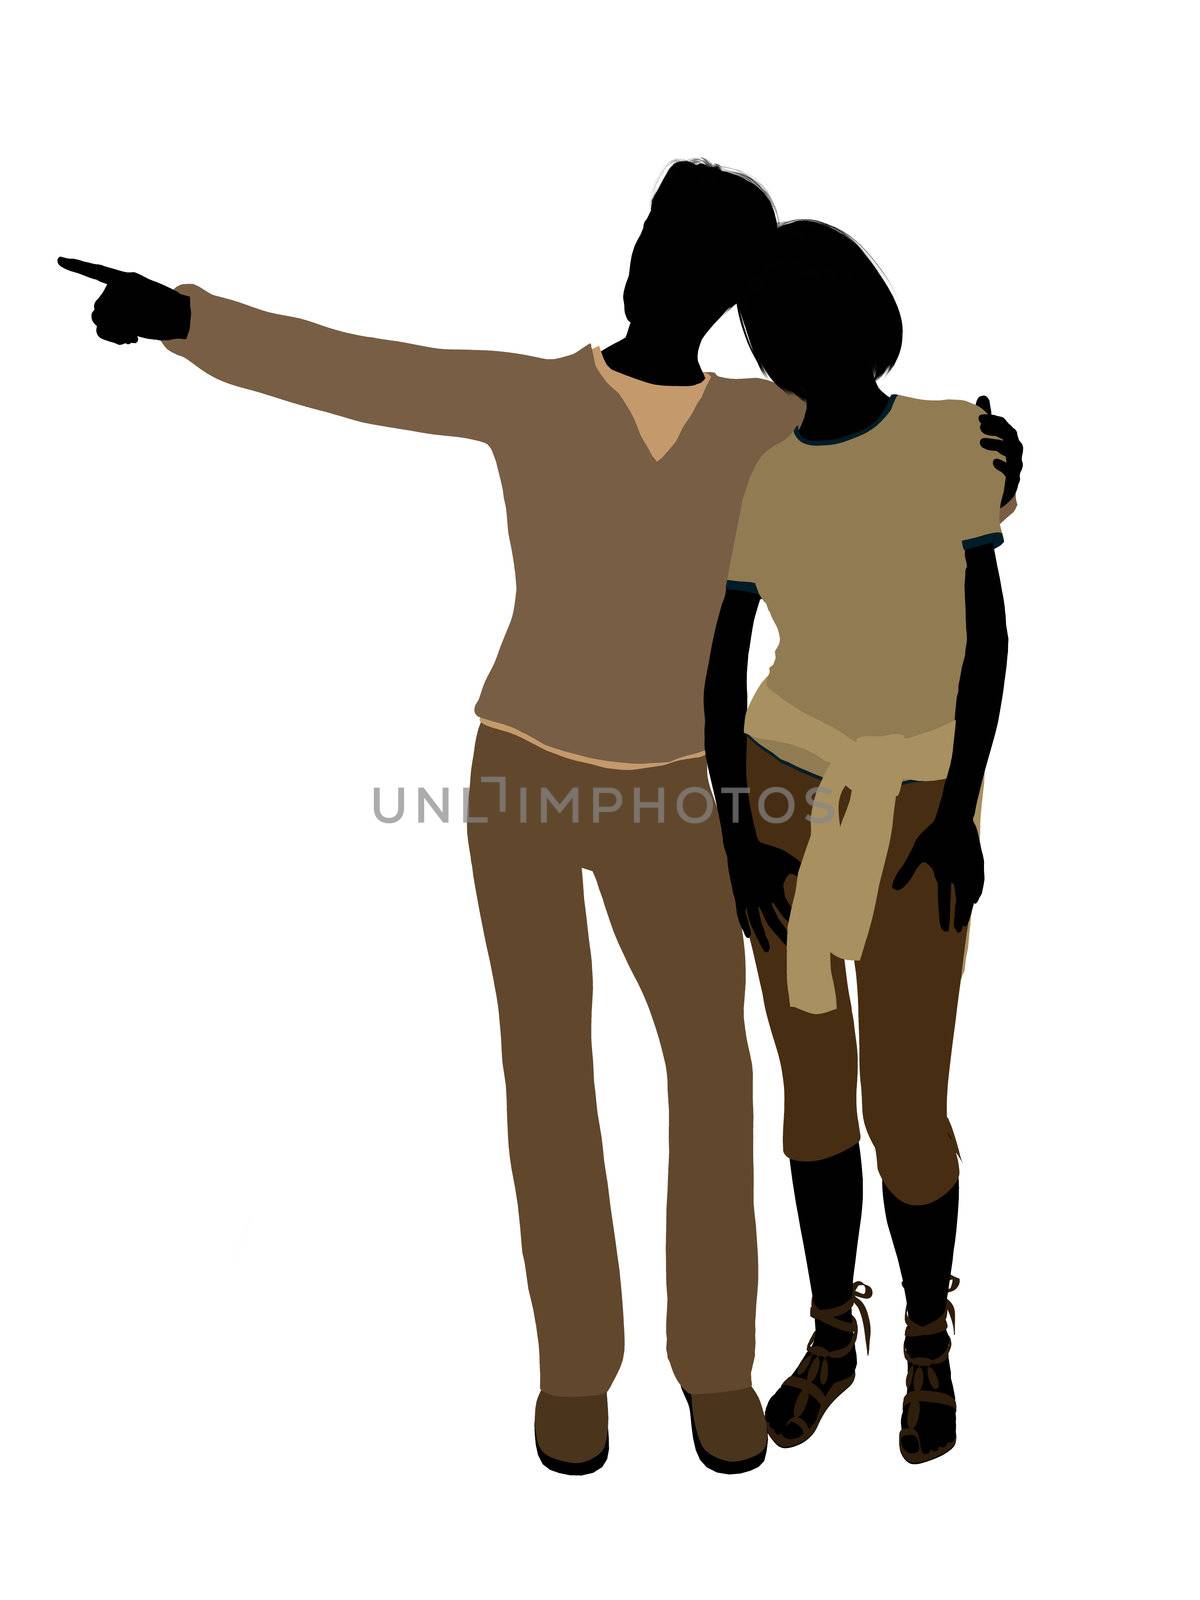 A couple silhouette illustration on a white background